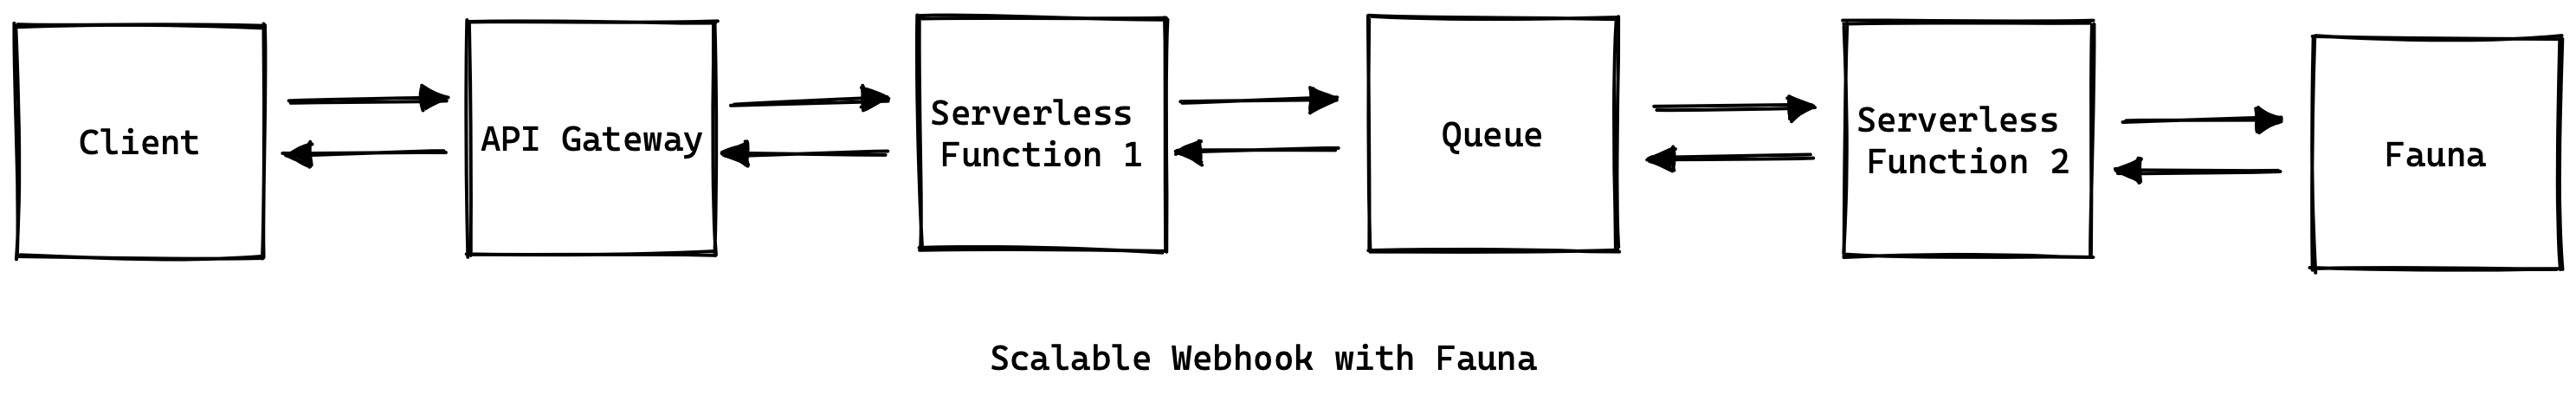 Scalable webhook with Fauna